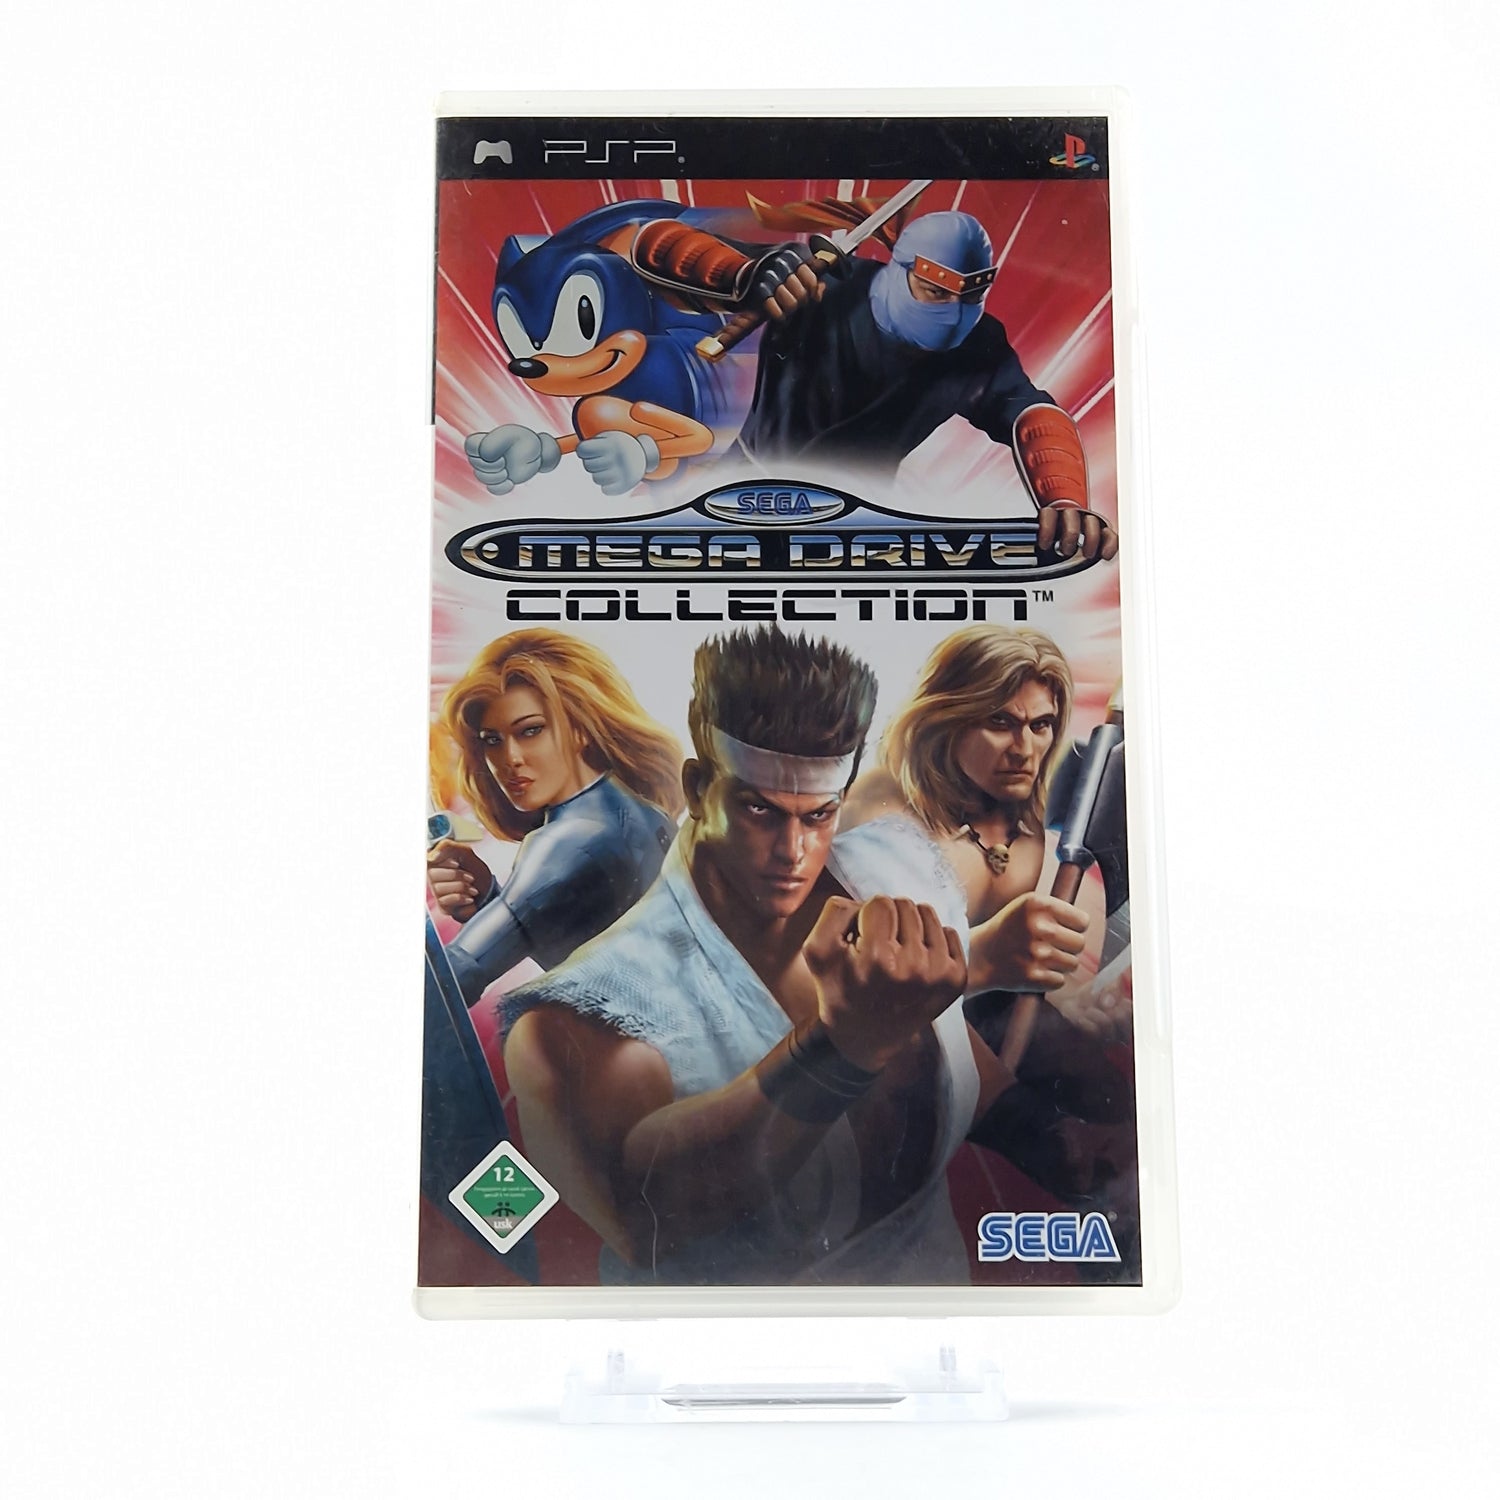 Playstation Portable Game: Mega Drive Collection - OVP Instructions CD / Sony PSP